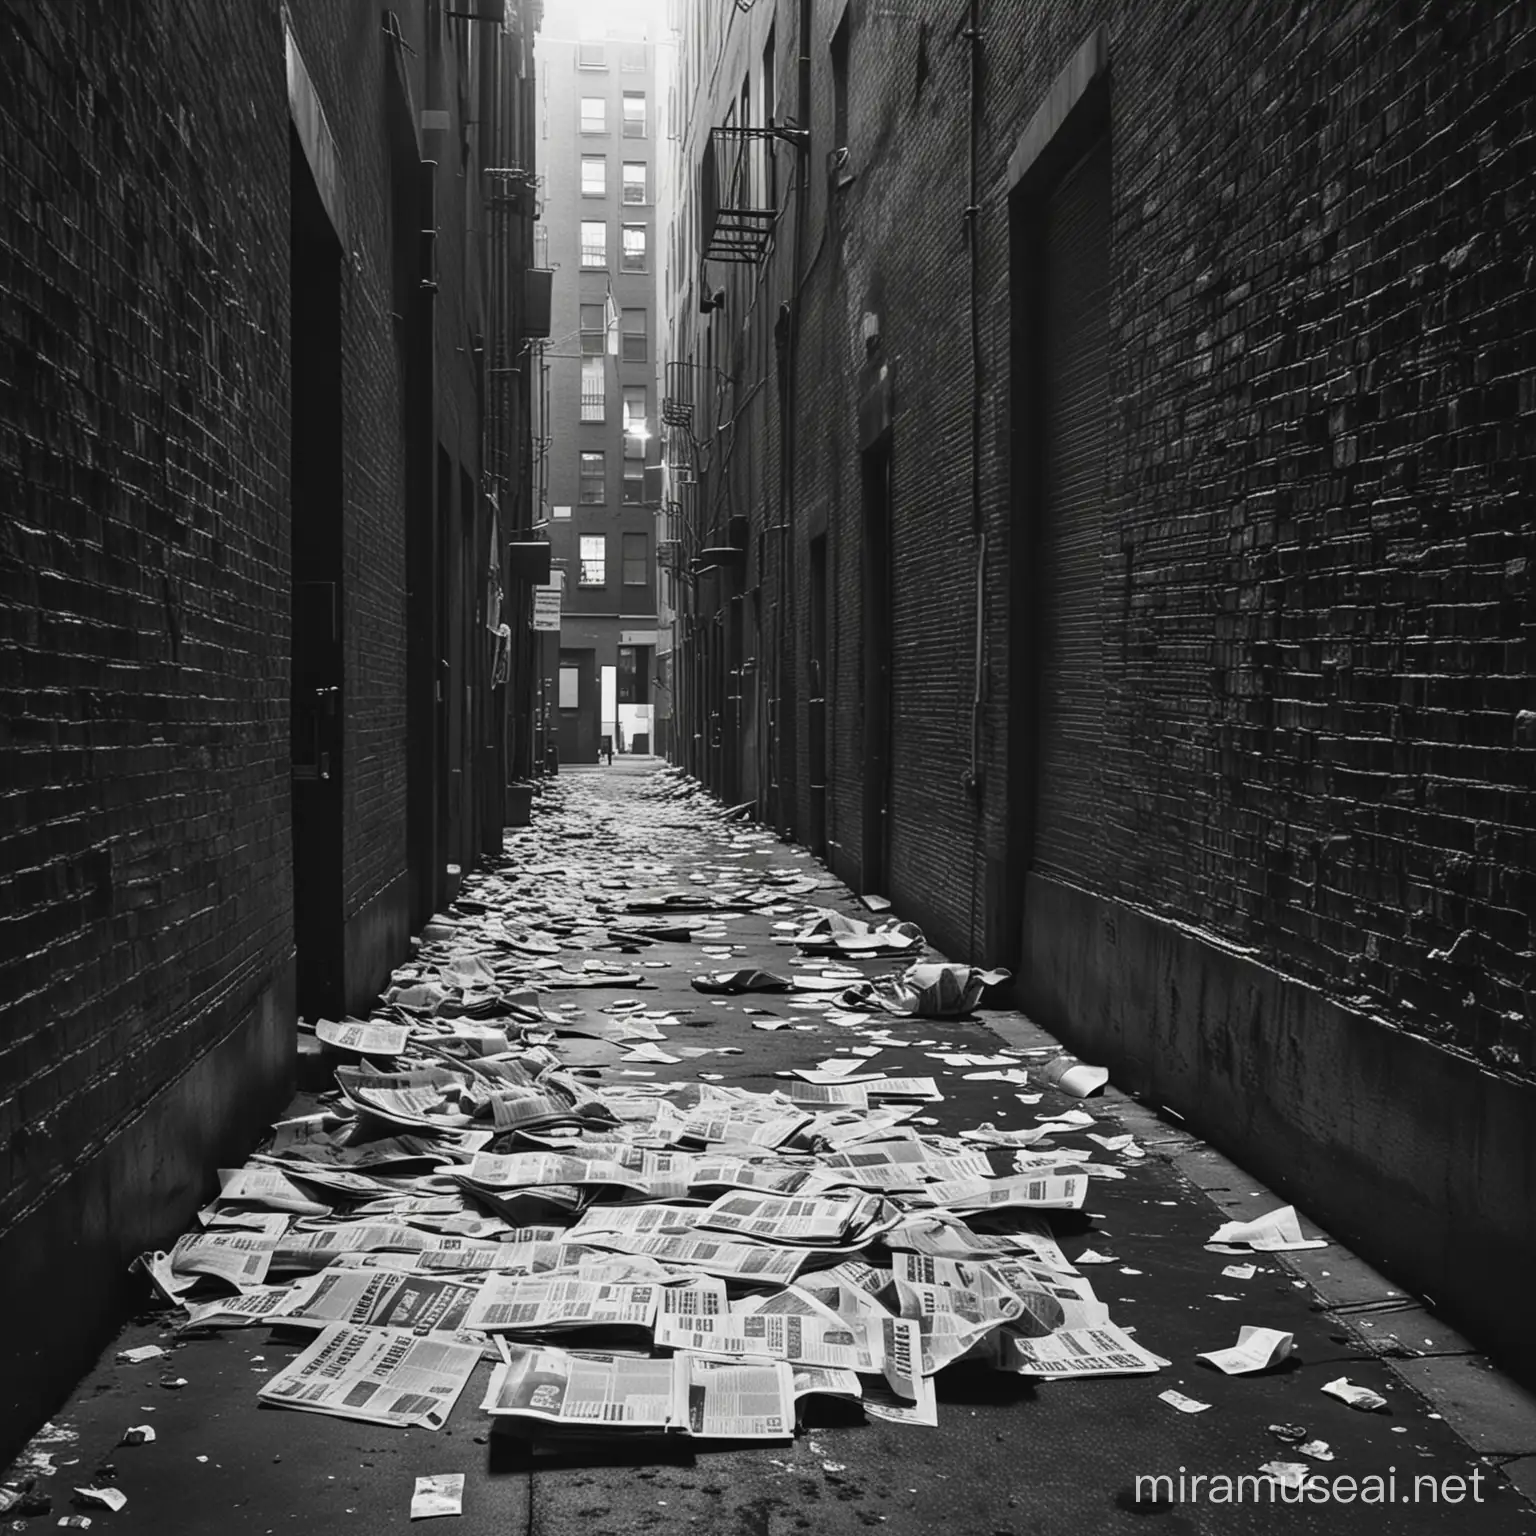 USA Today Newspapers Fluttering in Menacing Urban Alley